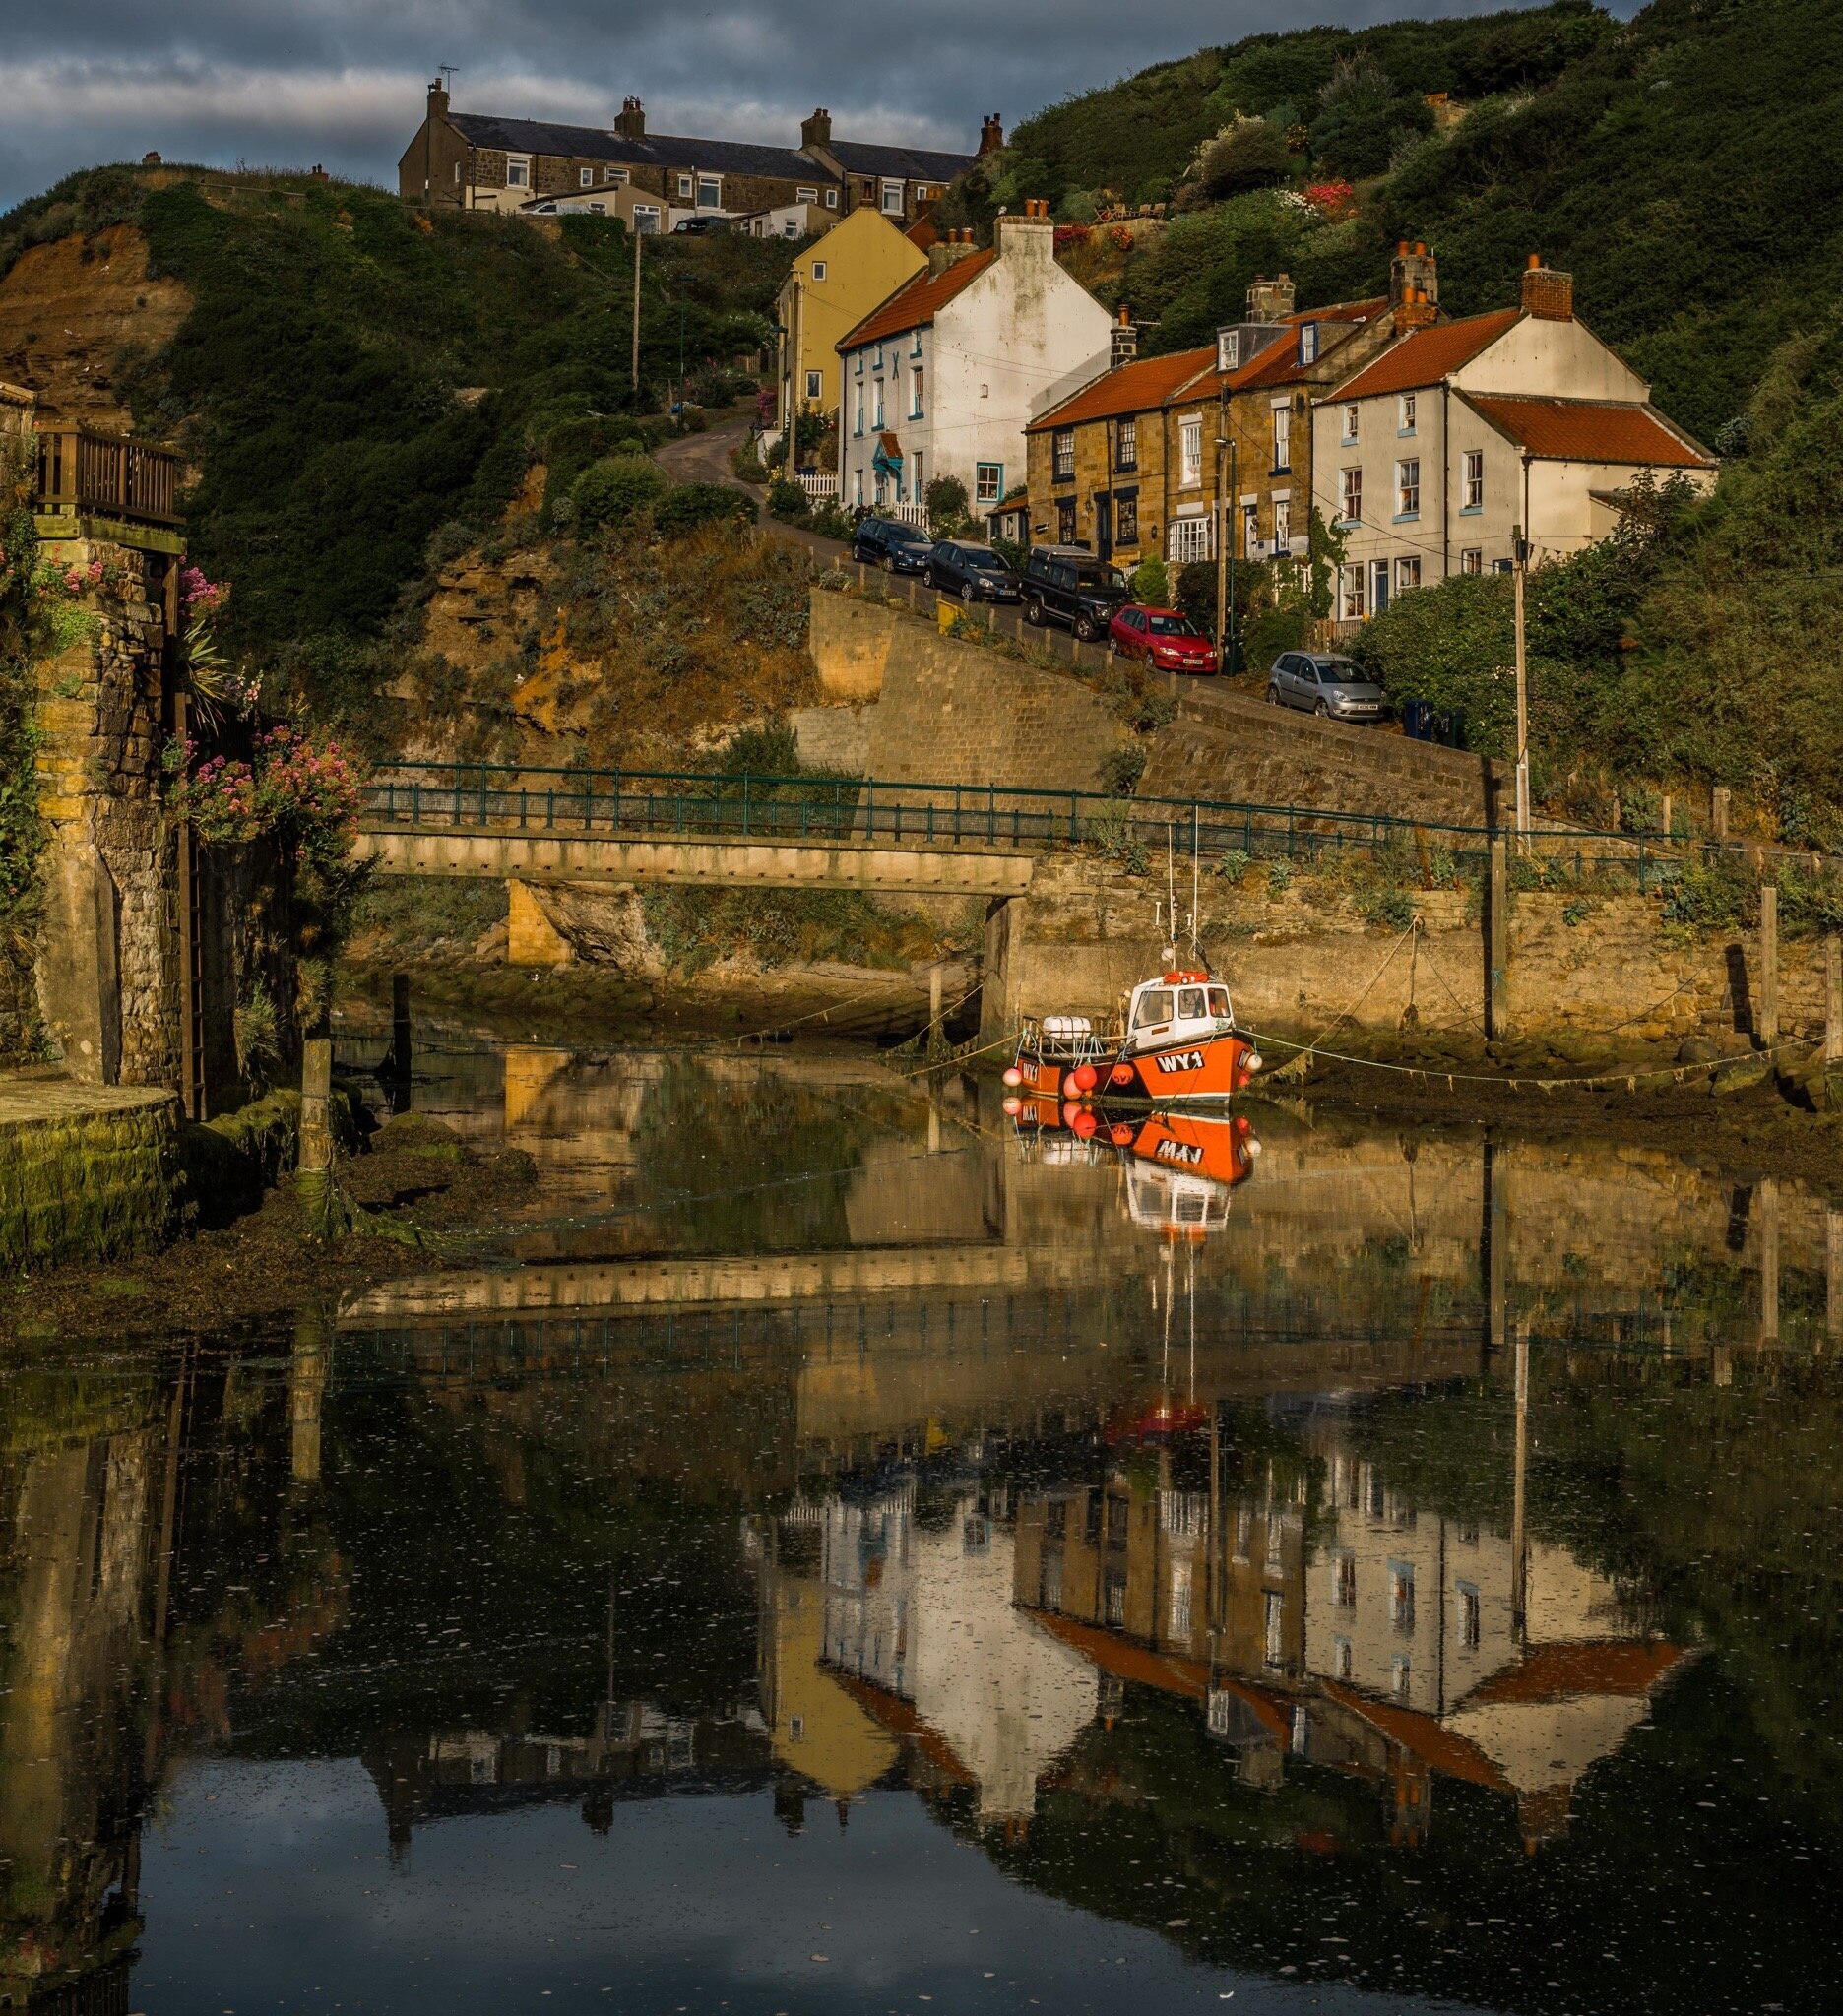 Visit Staithes: 2023 Travel Guide for Staithes, Saltburn-by-the